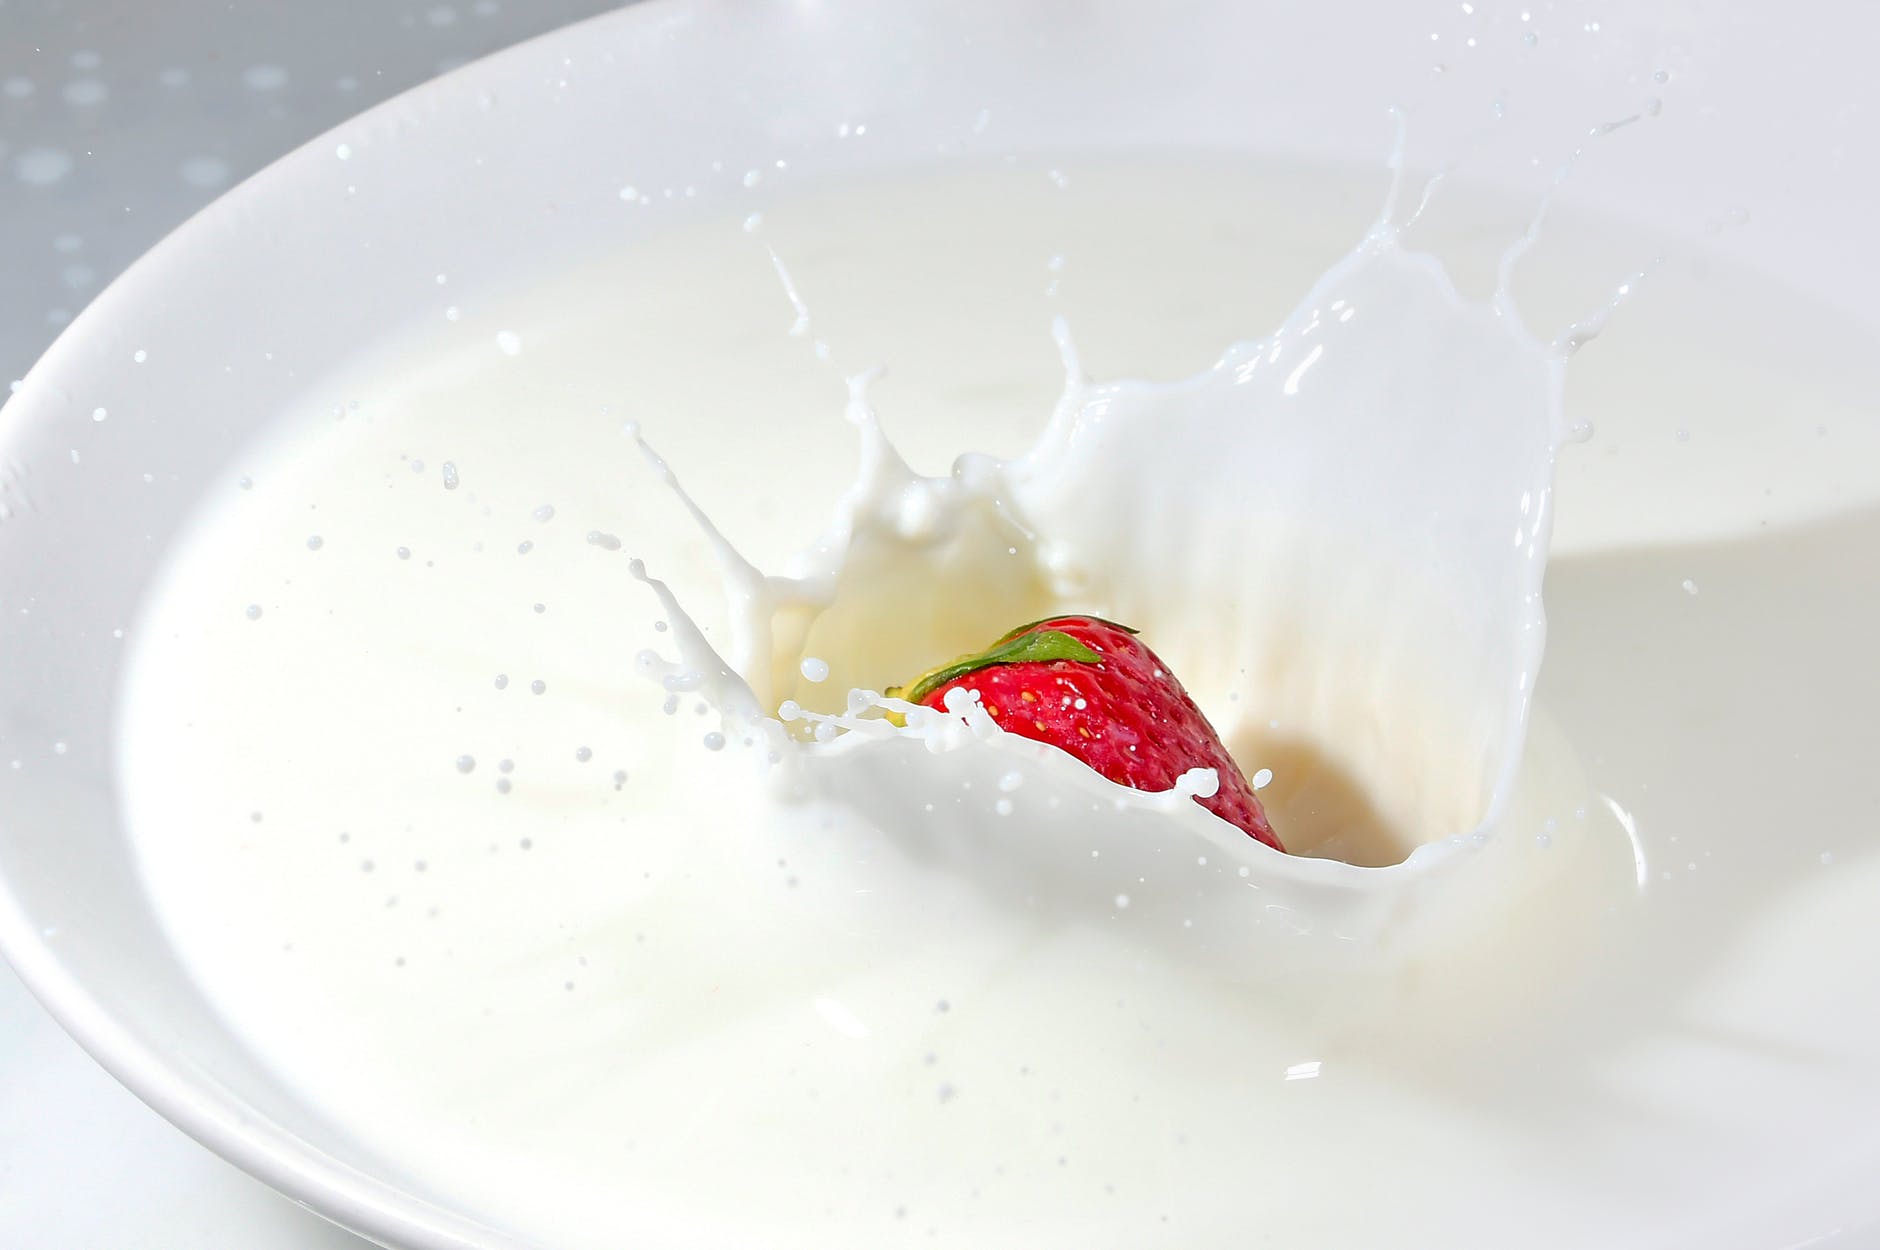 time lapse photography of strawberry falling on milk